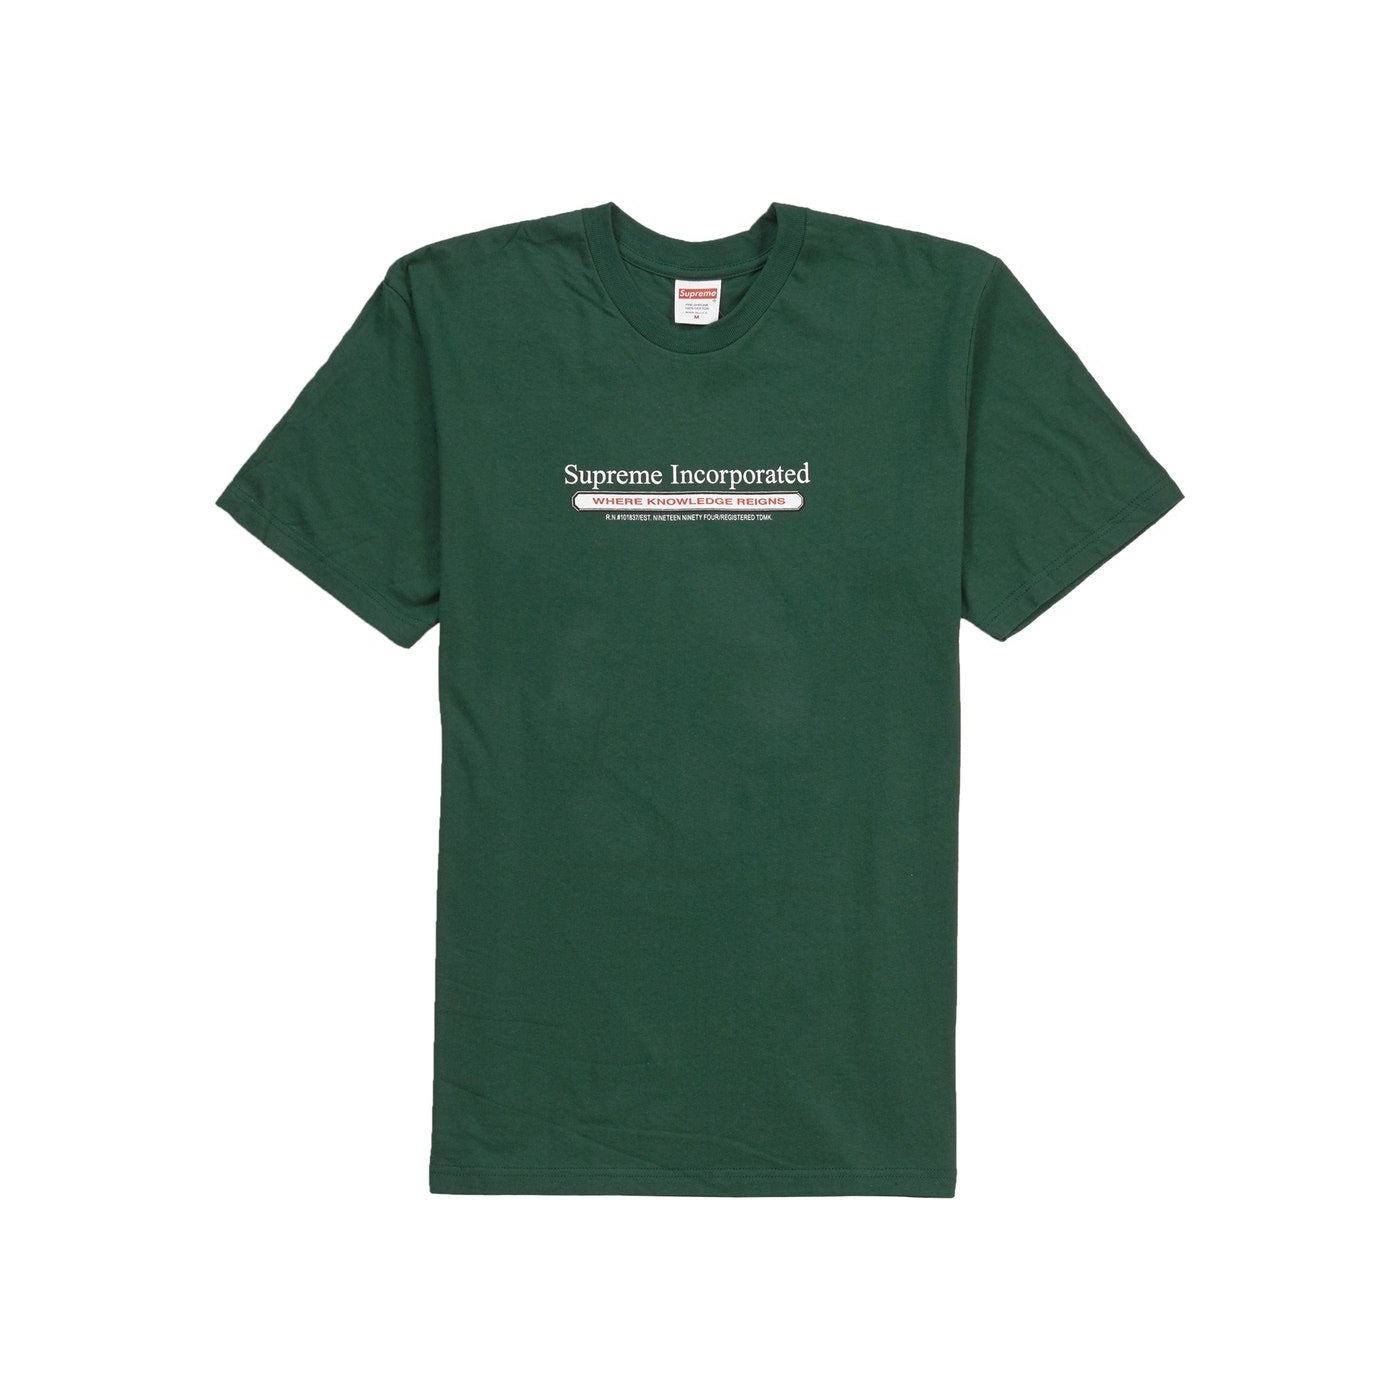 Supreme Incorporated tee Green - Centrall Online